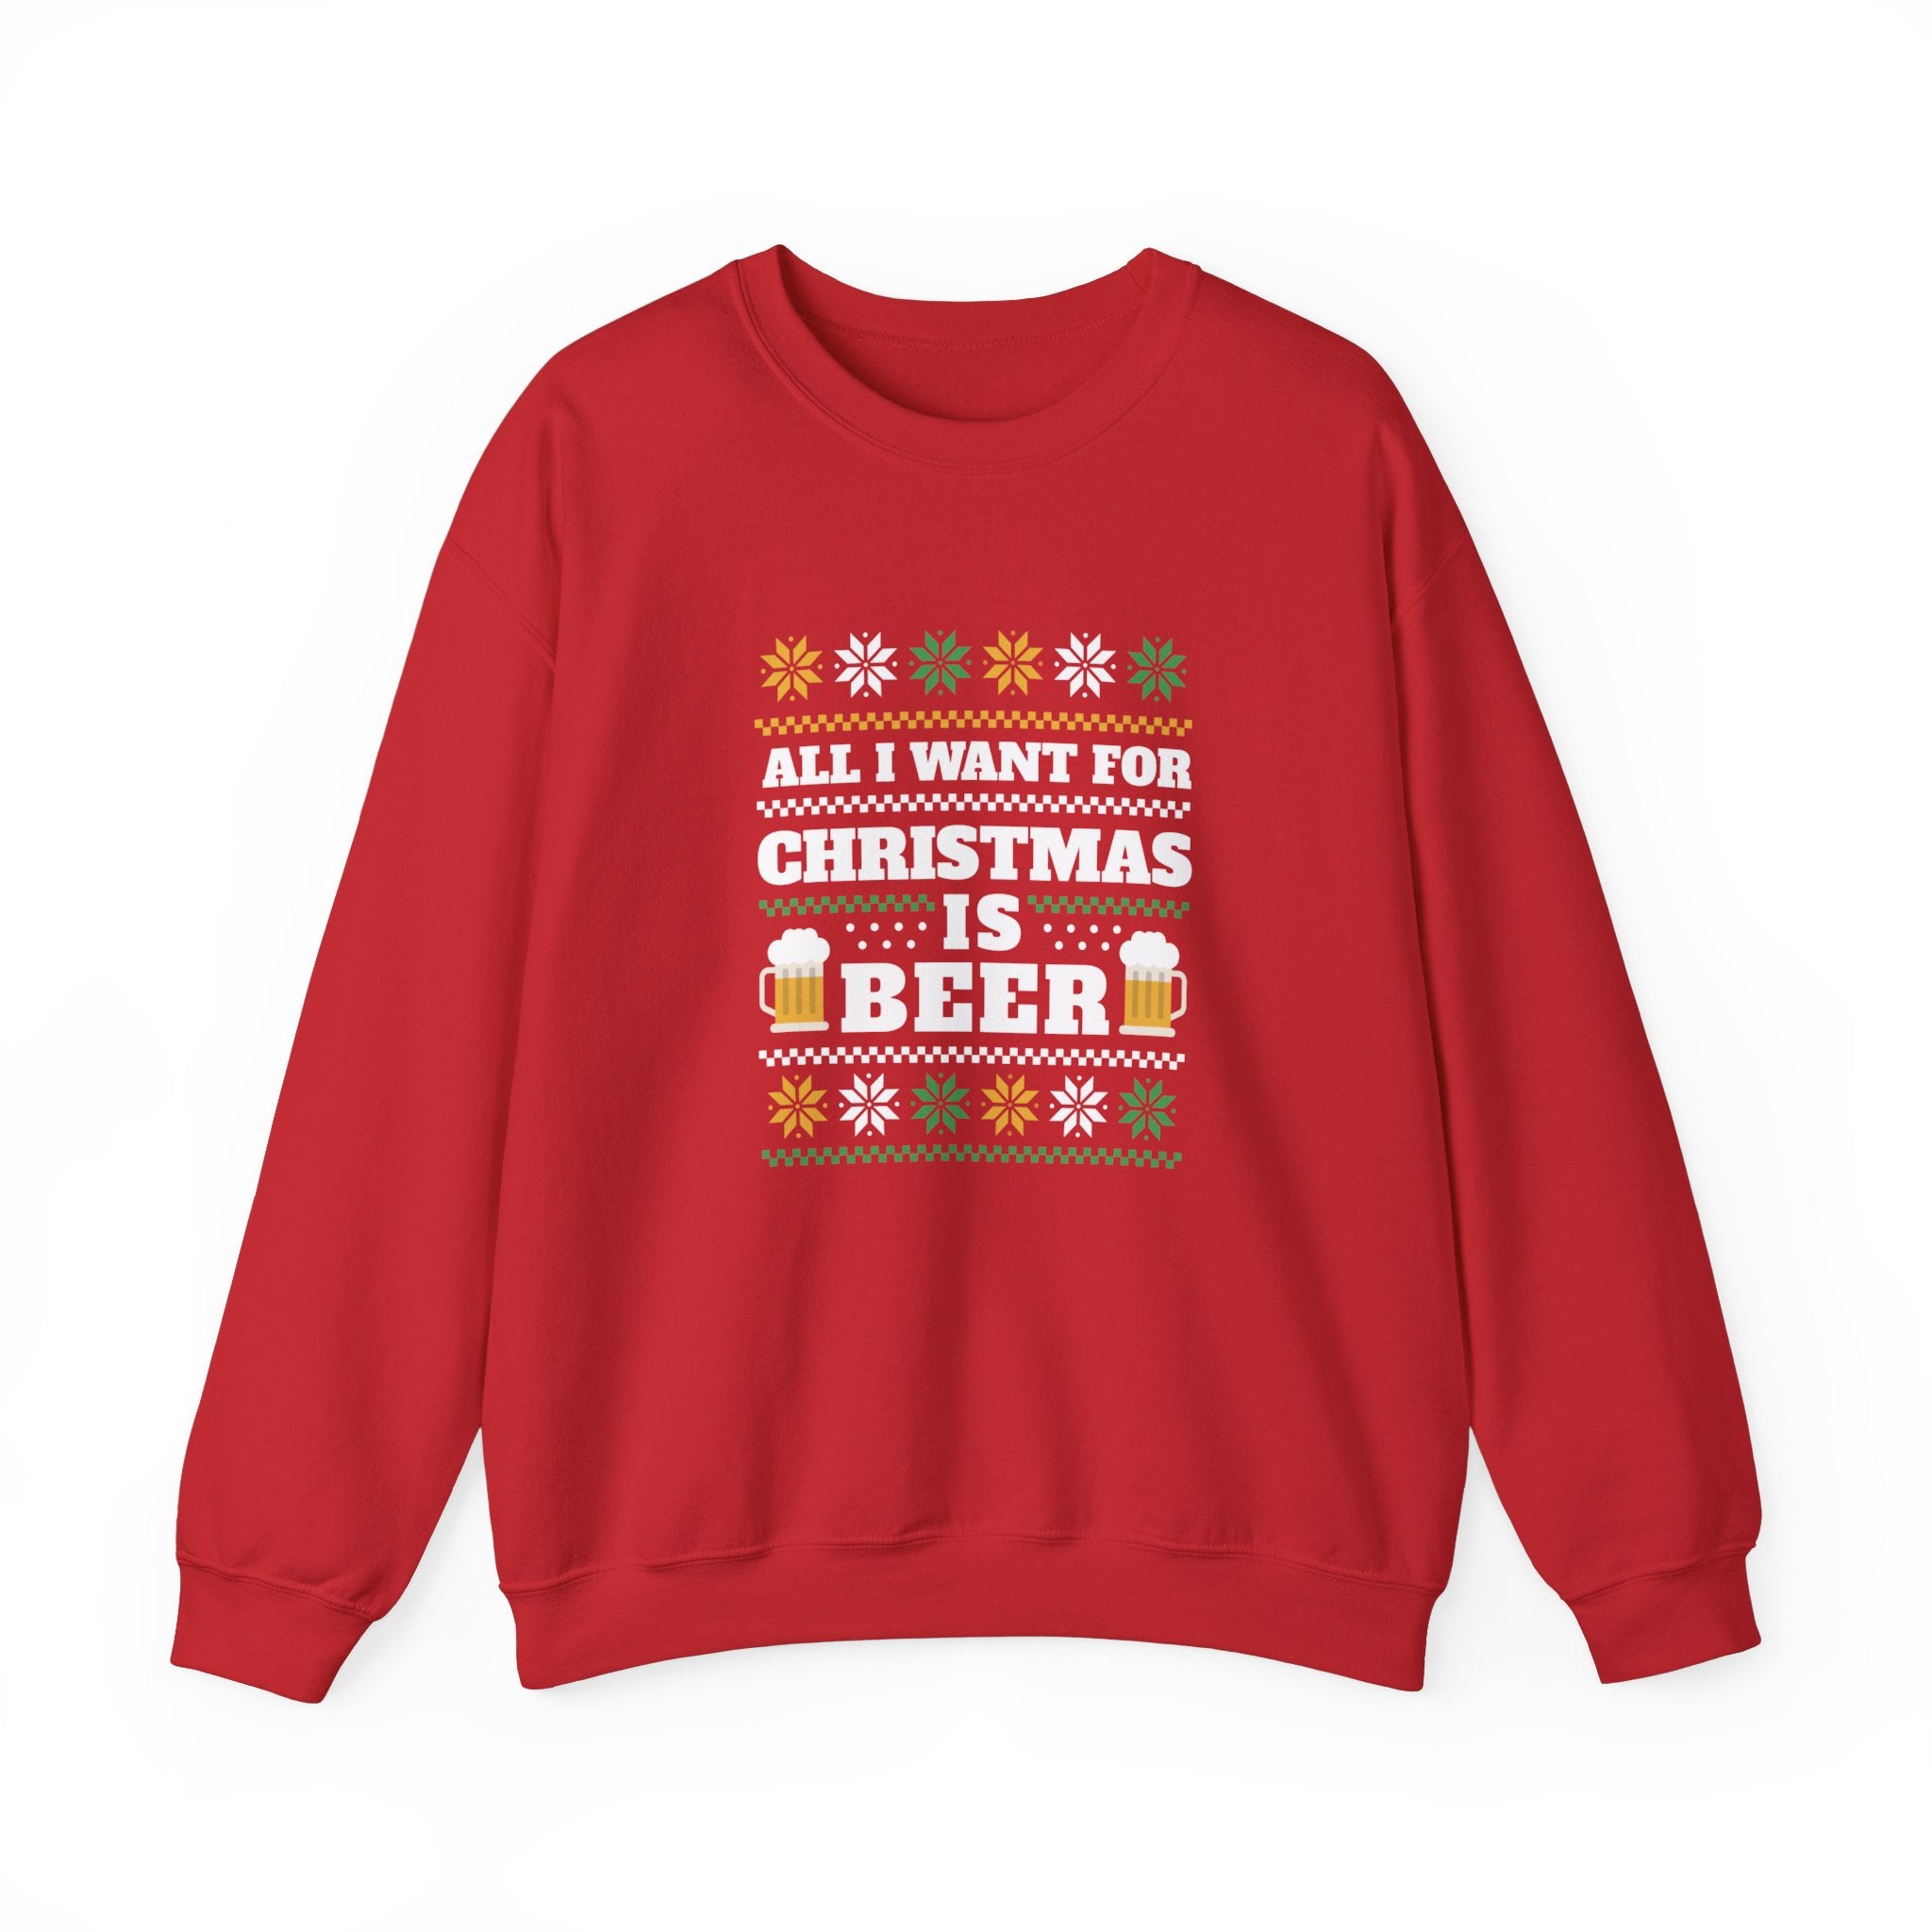 A red Beer Ugly Sweater - Sweatshirt with the text "All I Want for Christmas is Beer" and decorative patterns including beer mugs, snowflakes, and stars makes the perfect cozy choice for colder months.